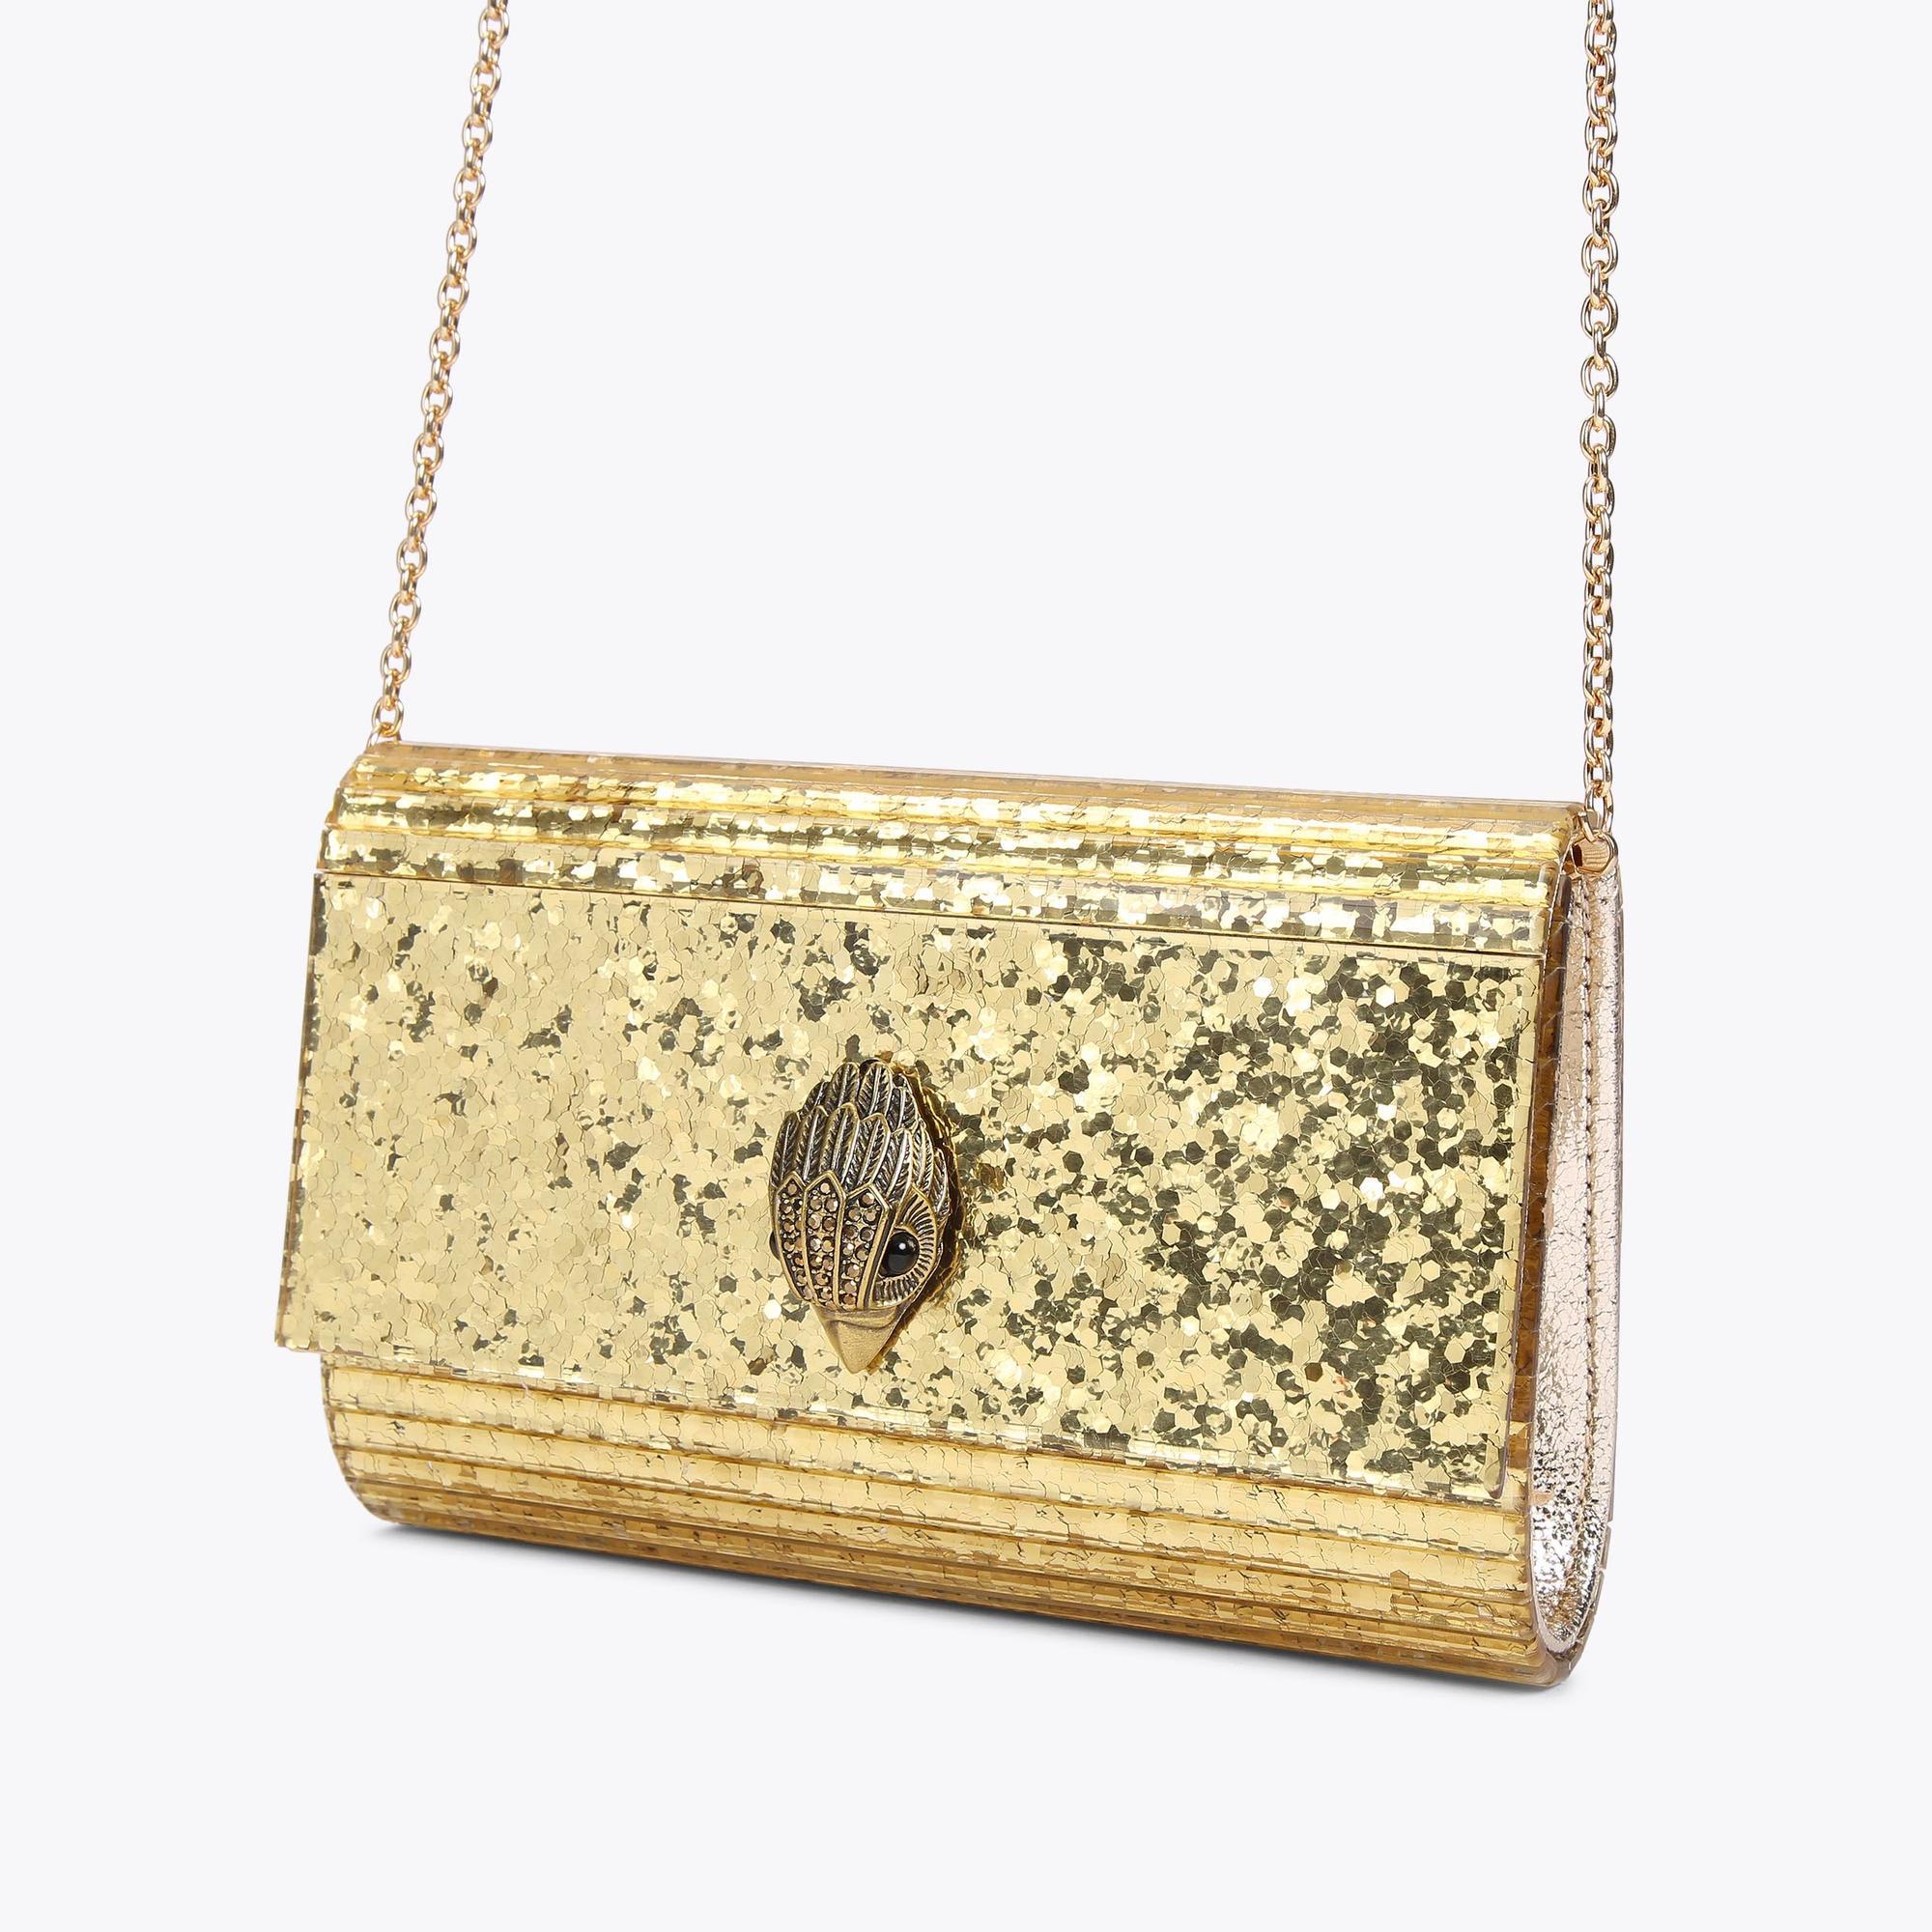 PARTY EAGLE CLUTCH DRENCH by KURT GEIGER LONDON